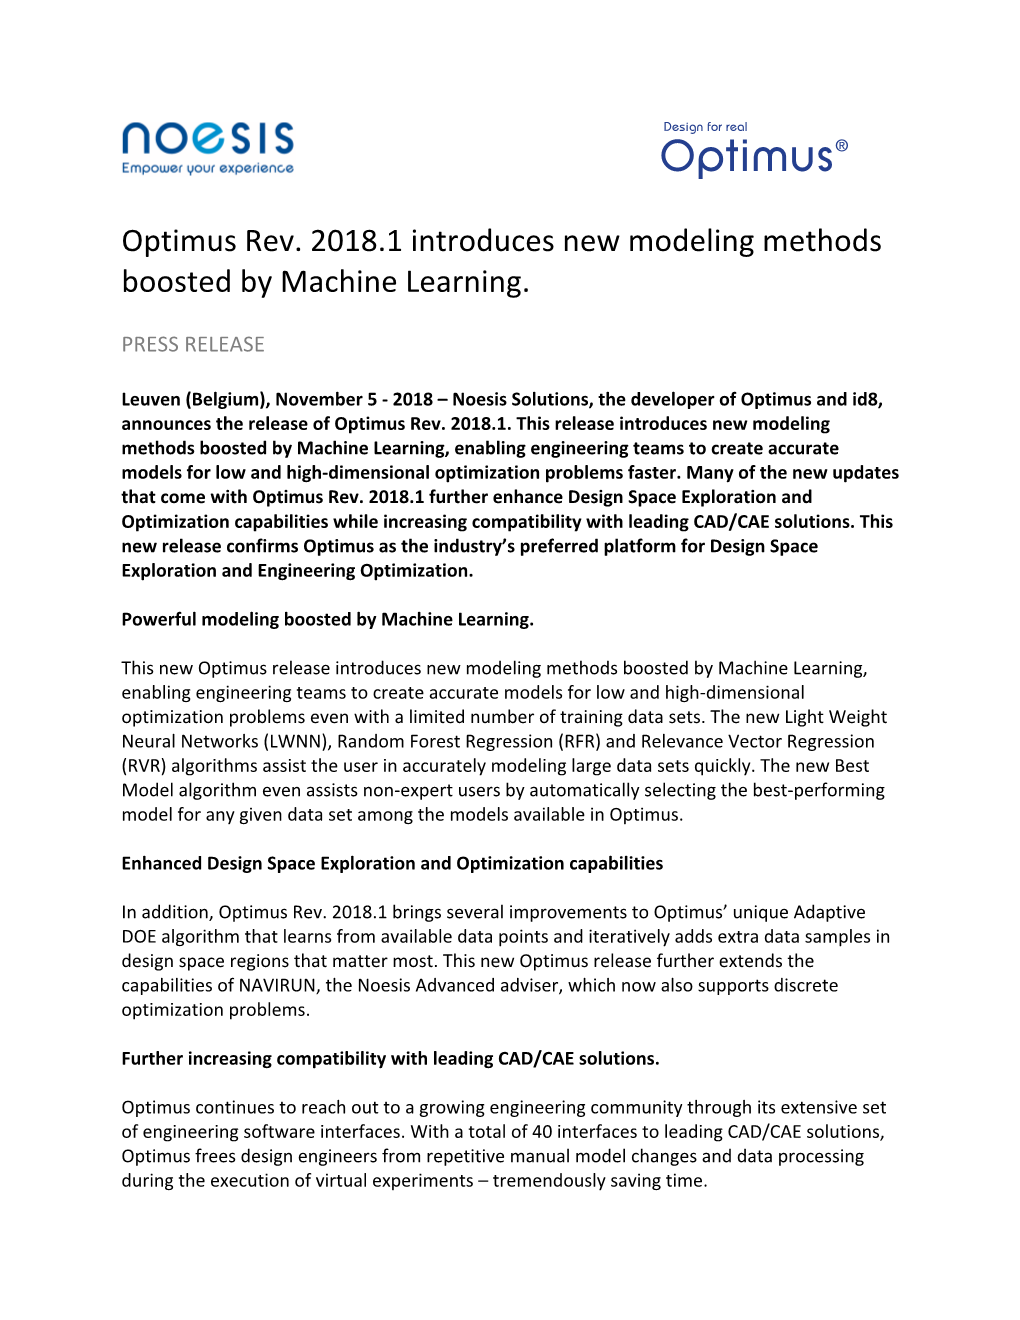 Optimus Rev. 2018.1 Introduces New Modeling Methods Boosted by Machine Learning